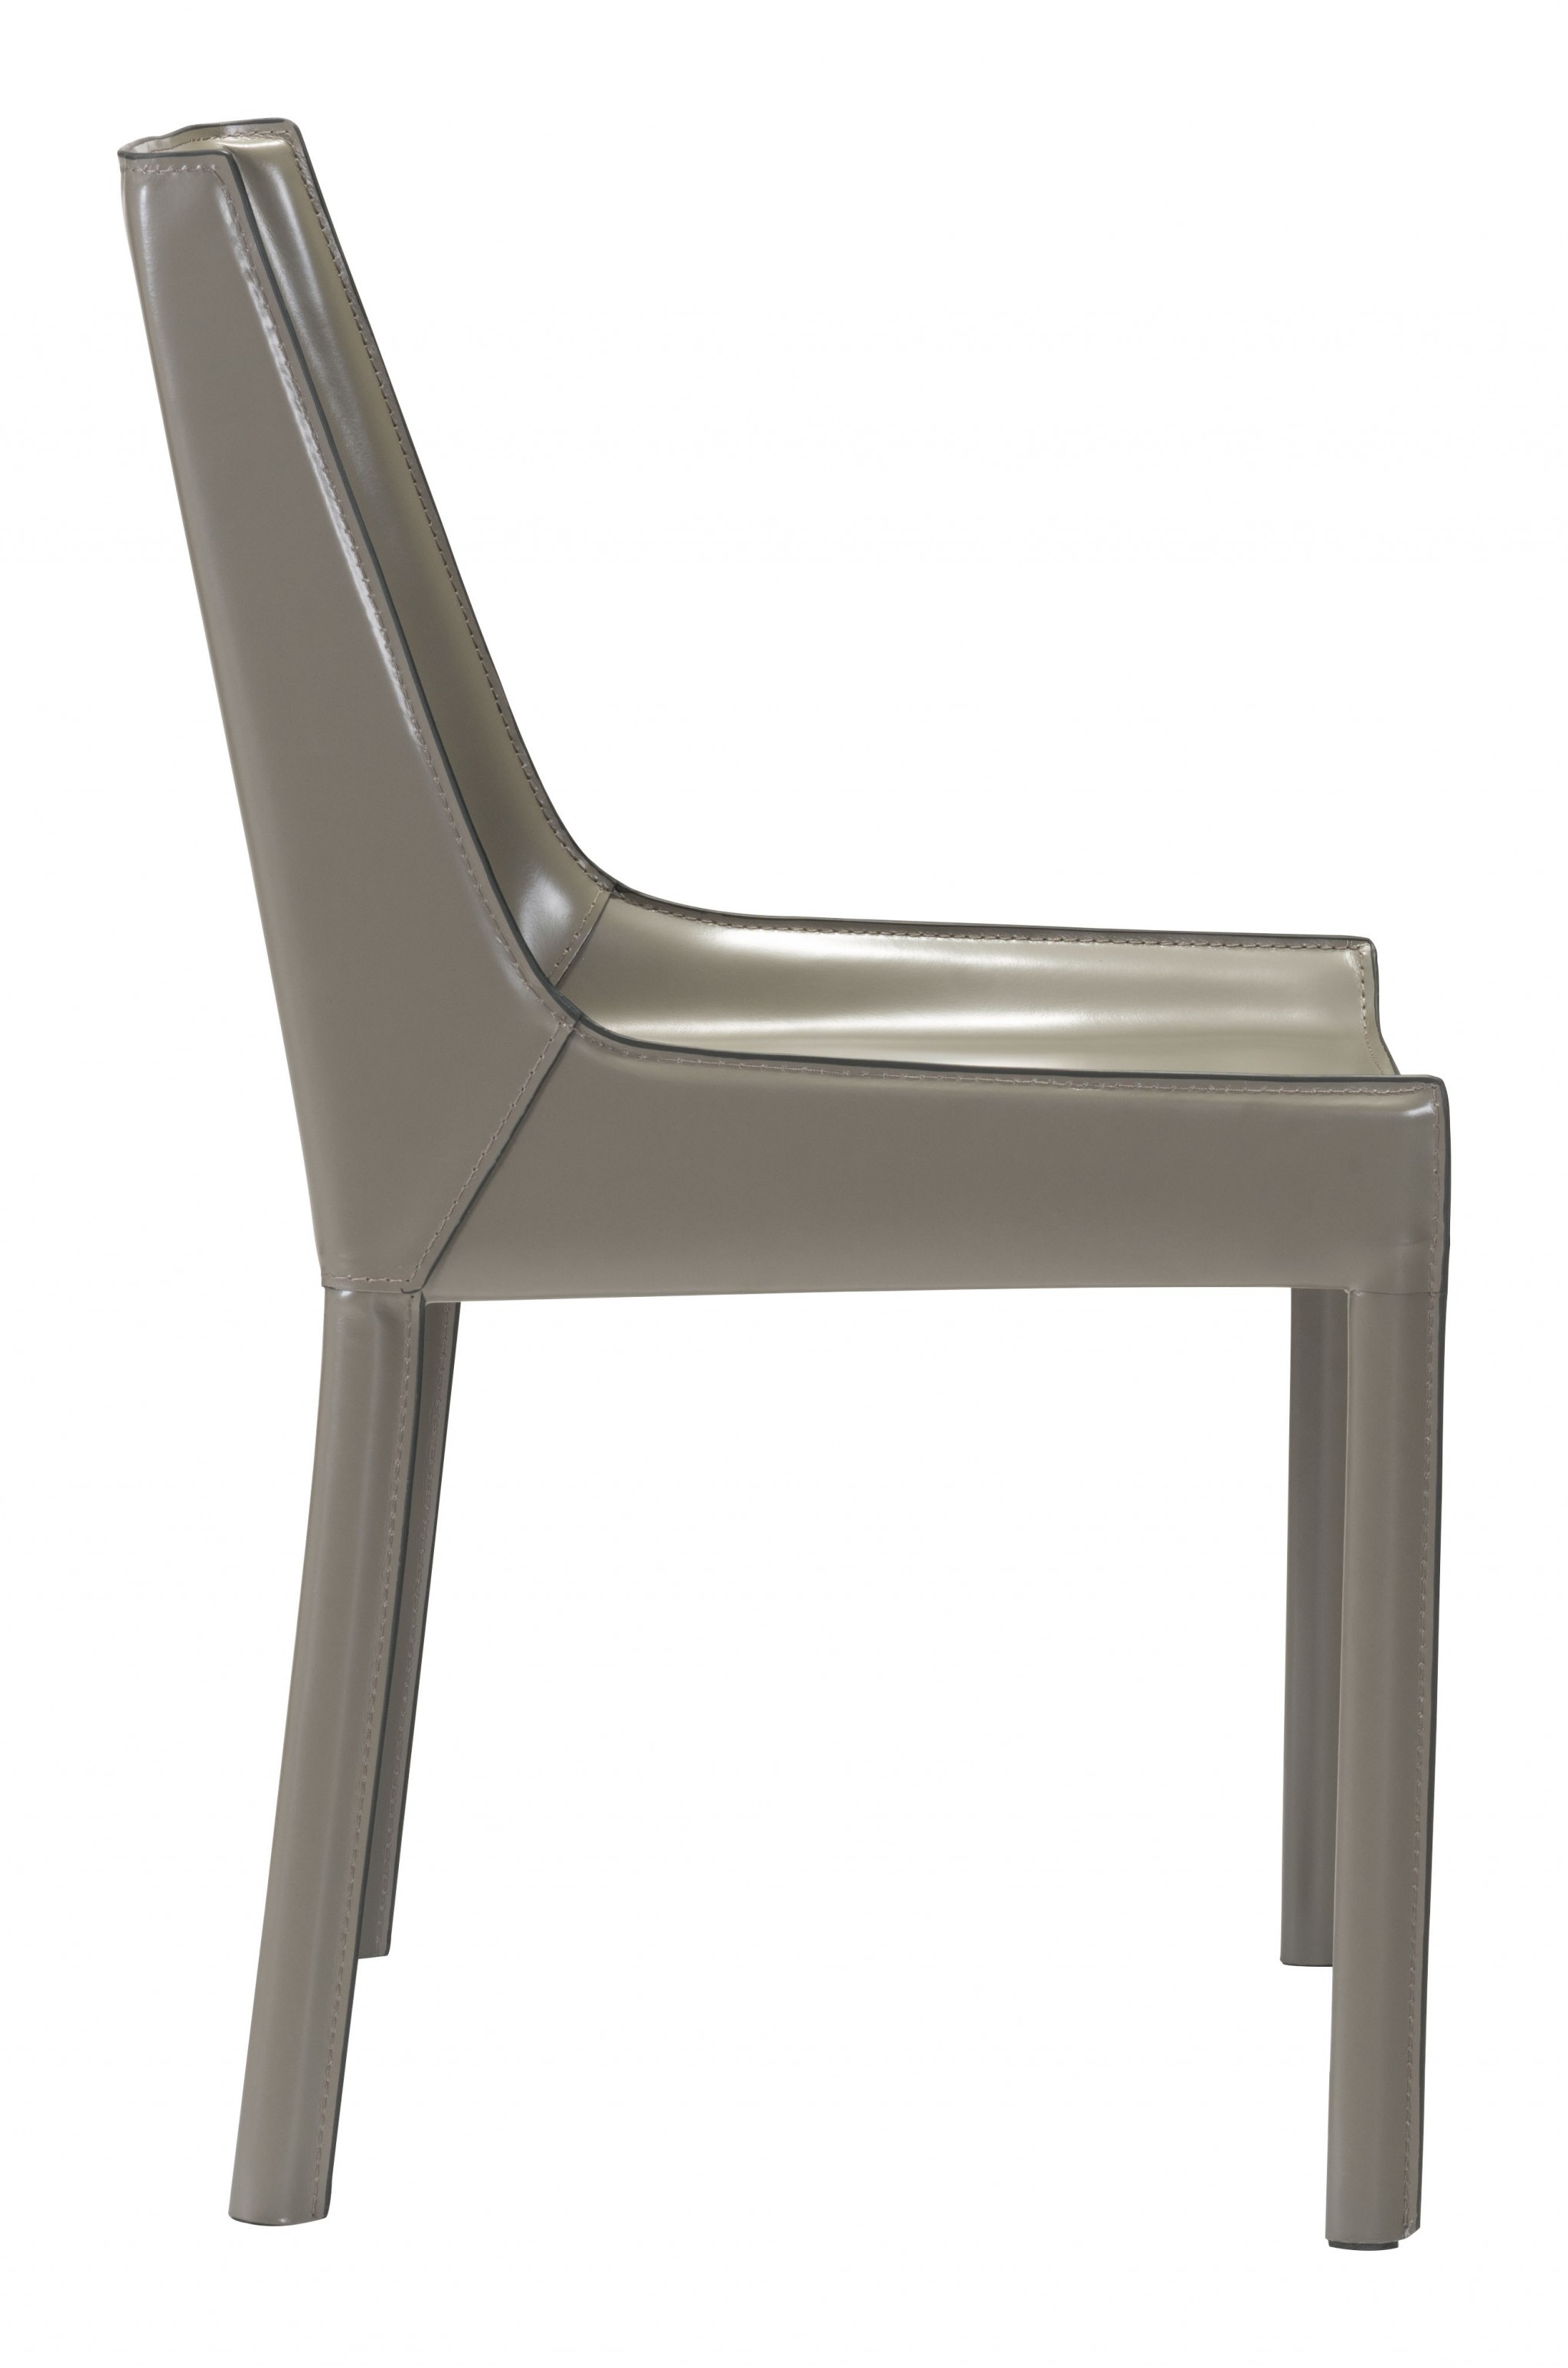 Set of Two Gray Faux Leather Dining Chairs